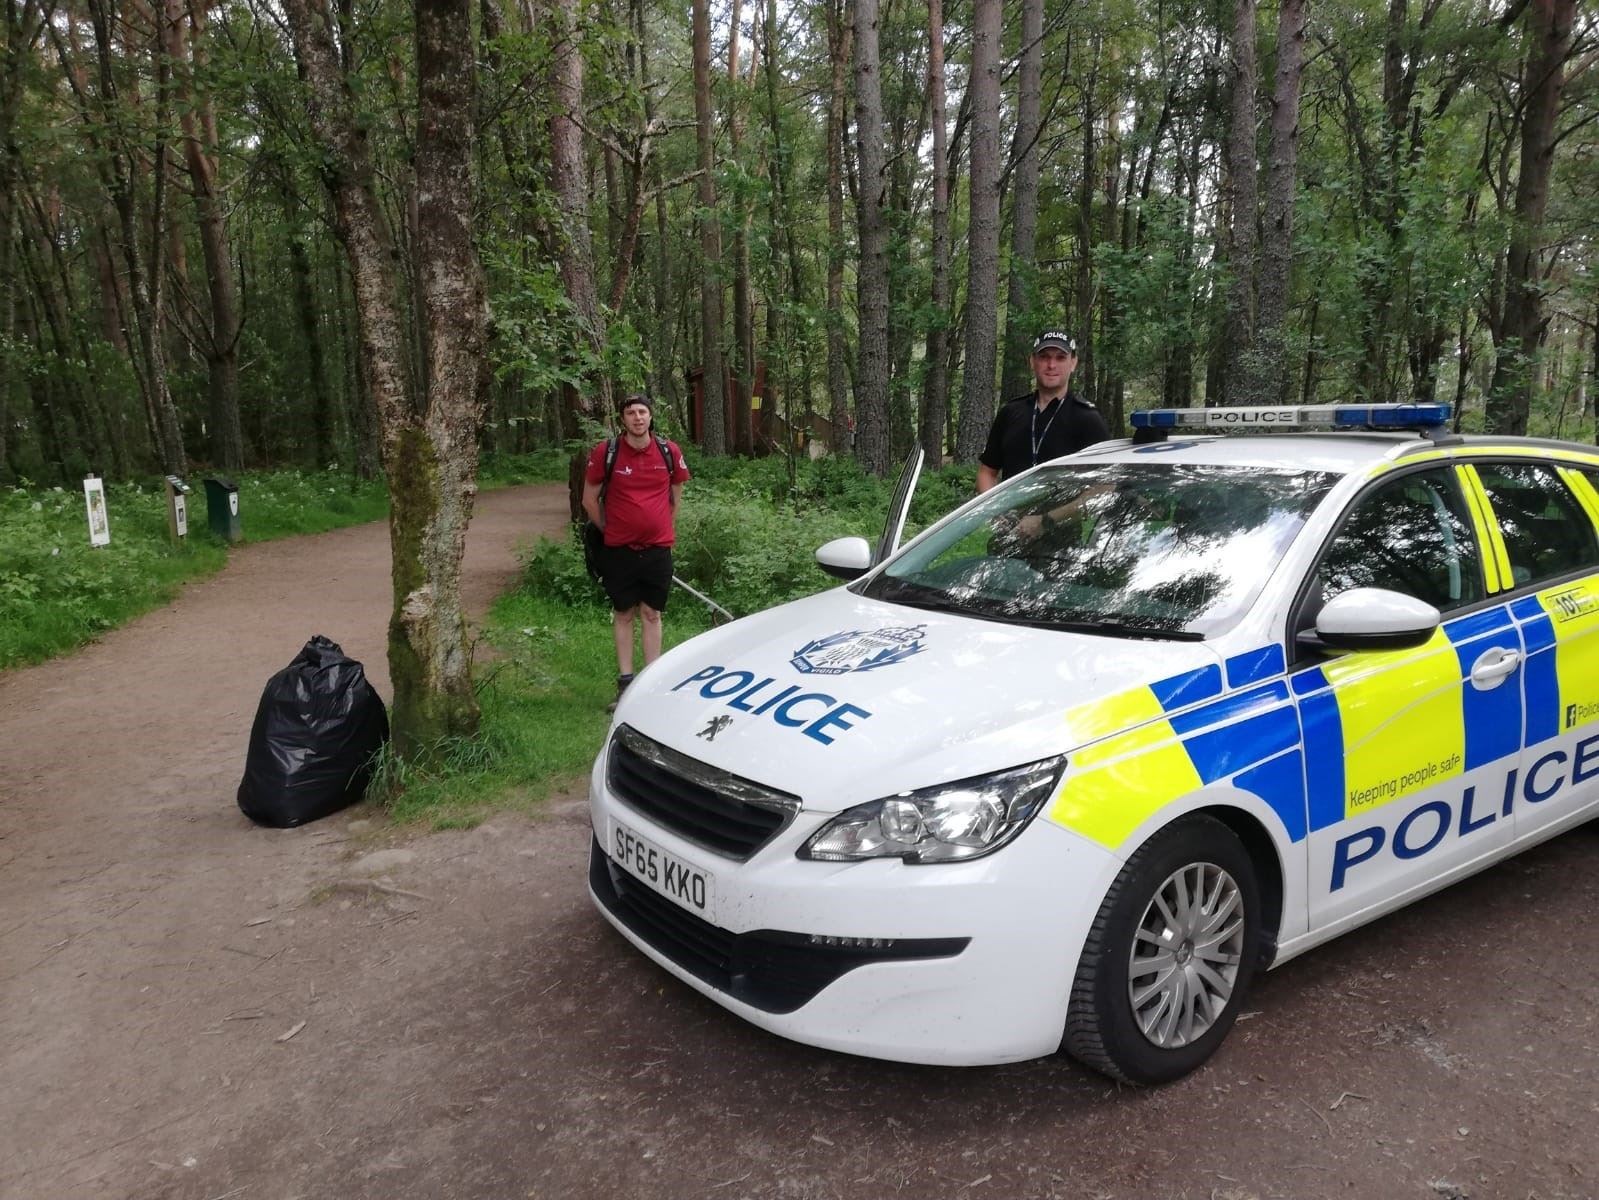 There has been an enhanced police presence at Loch Morlich at weekends since the middle of this month.